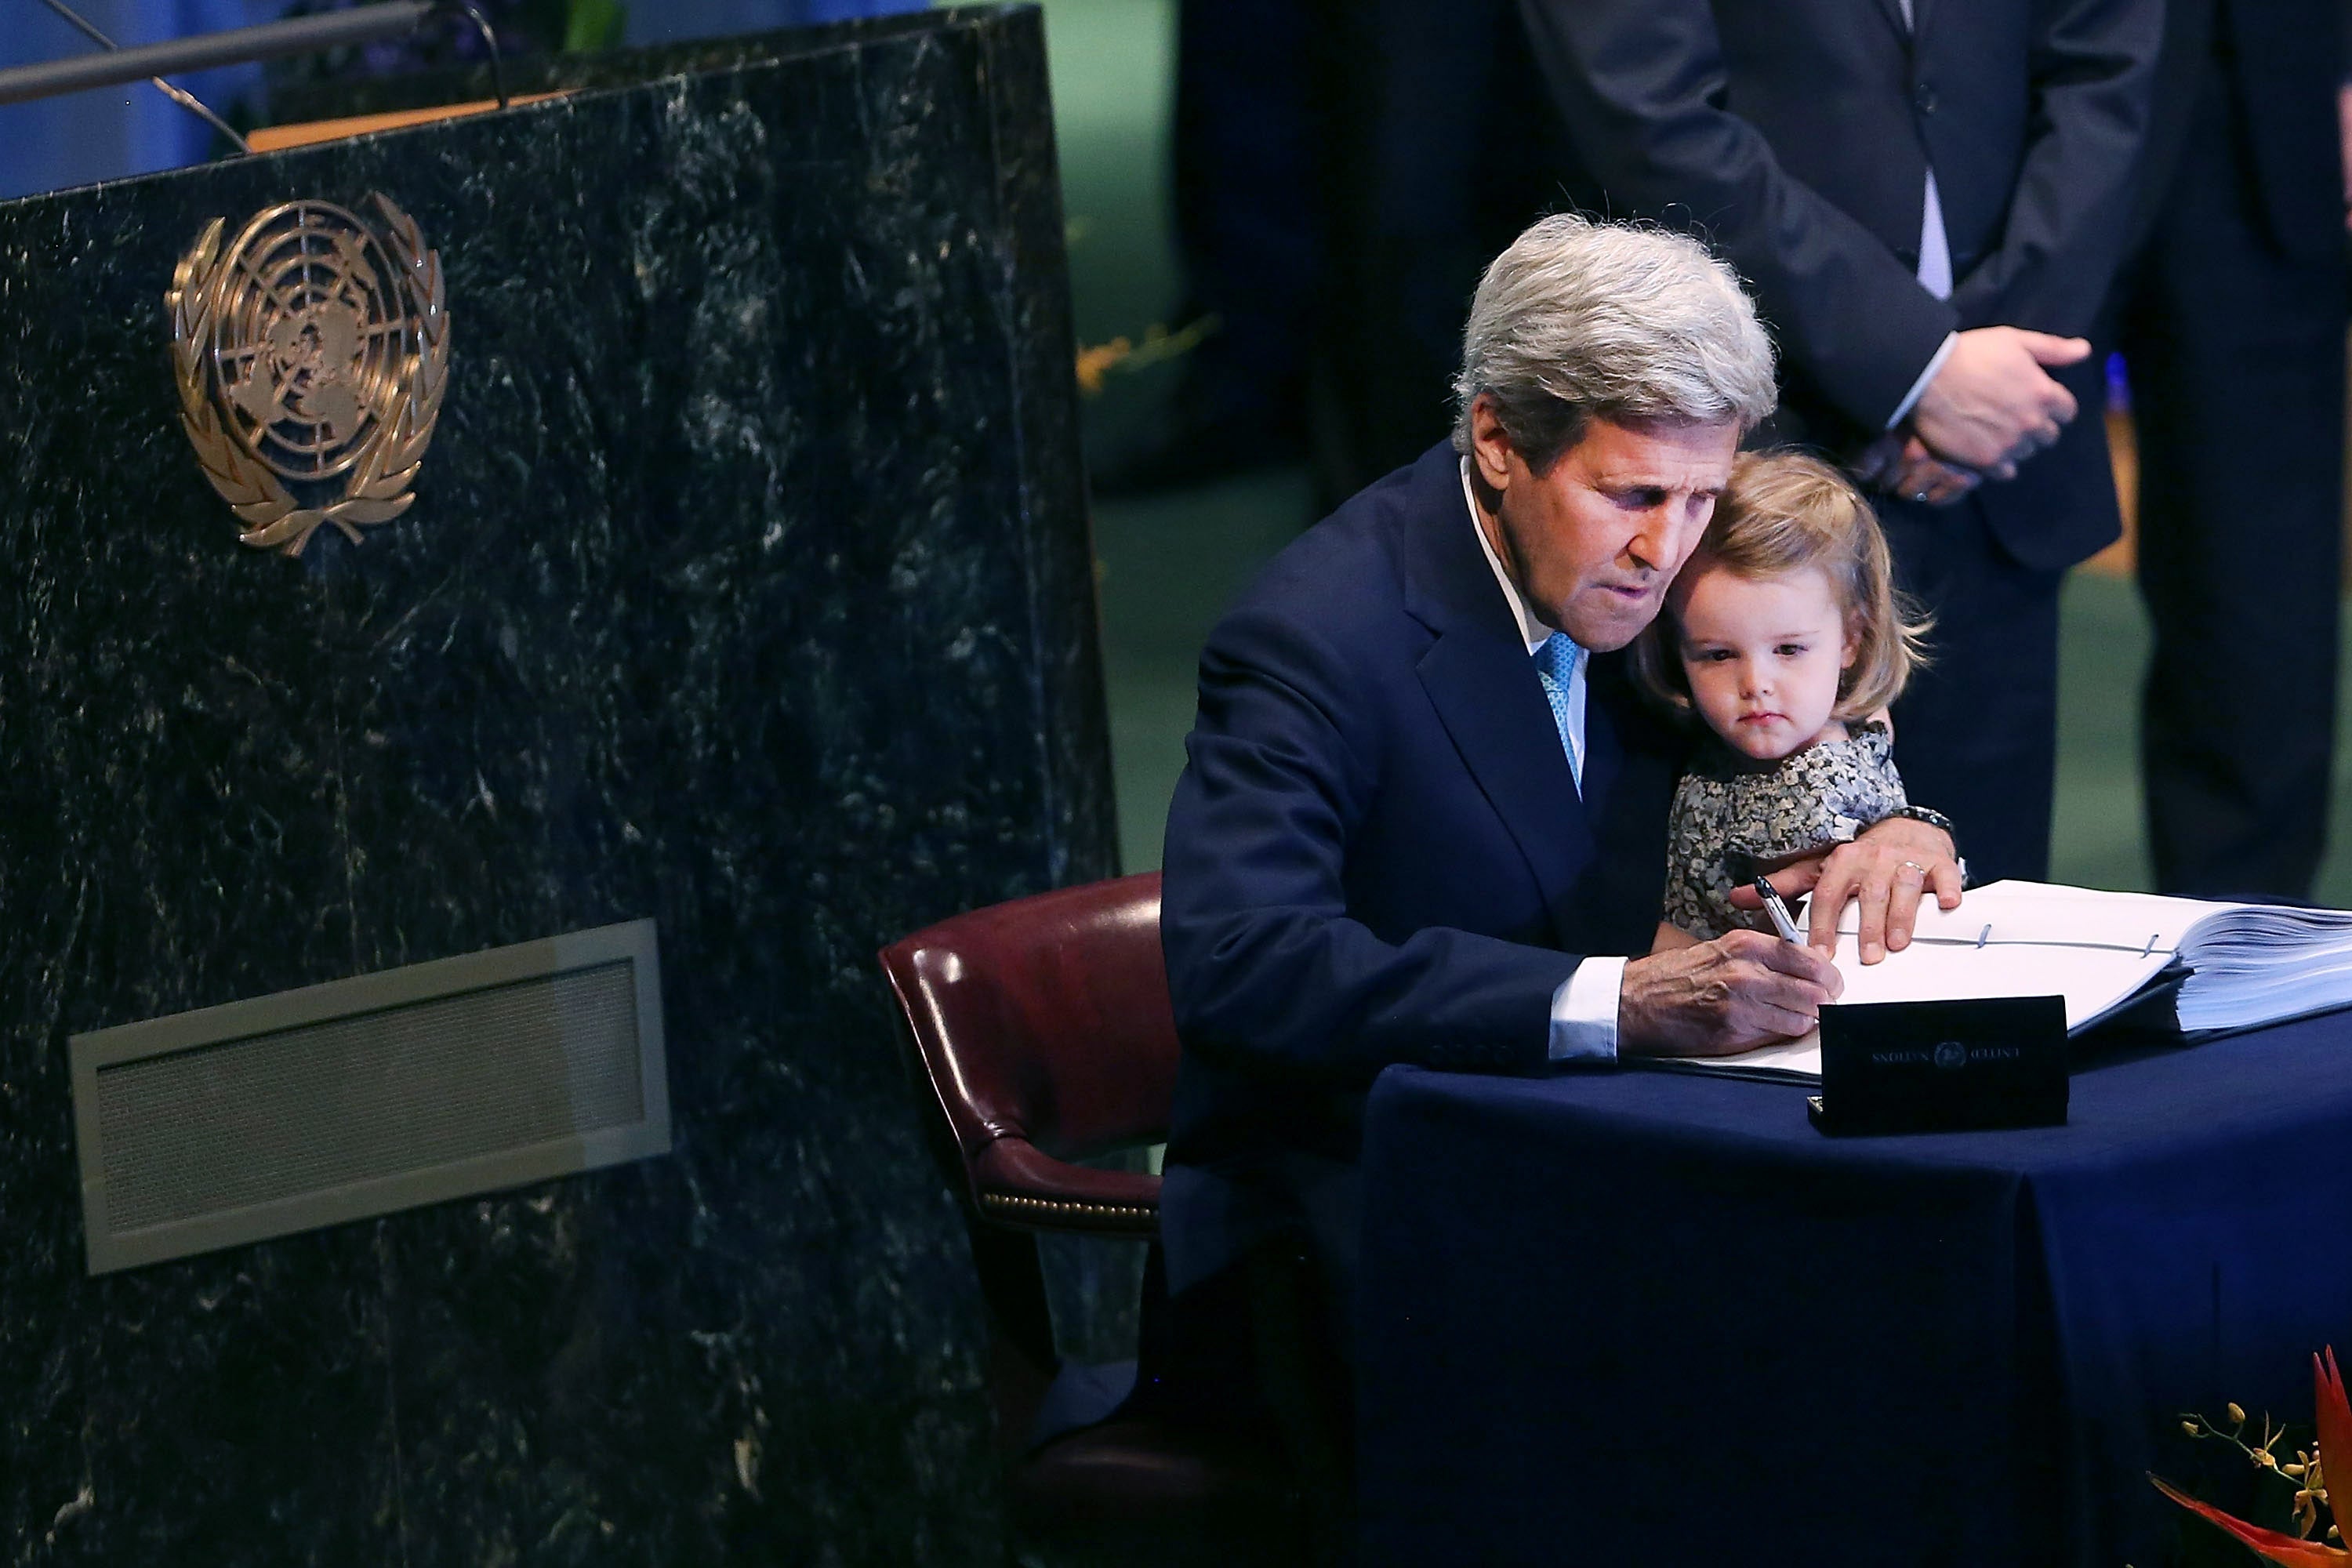 US Secretary of State John Kerry holds his two year-old grand daughter for the signing of the accord at the United Nations Signing Ceremony for the Paris Agreement climate change accord